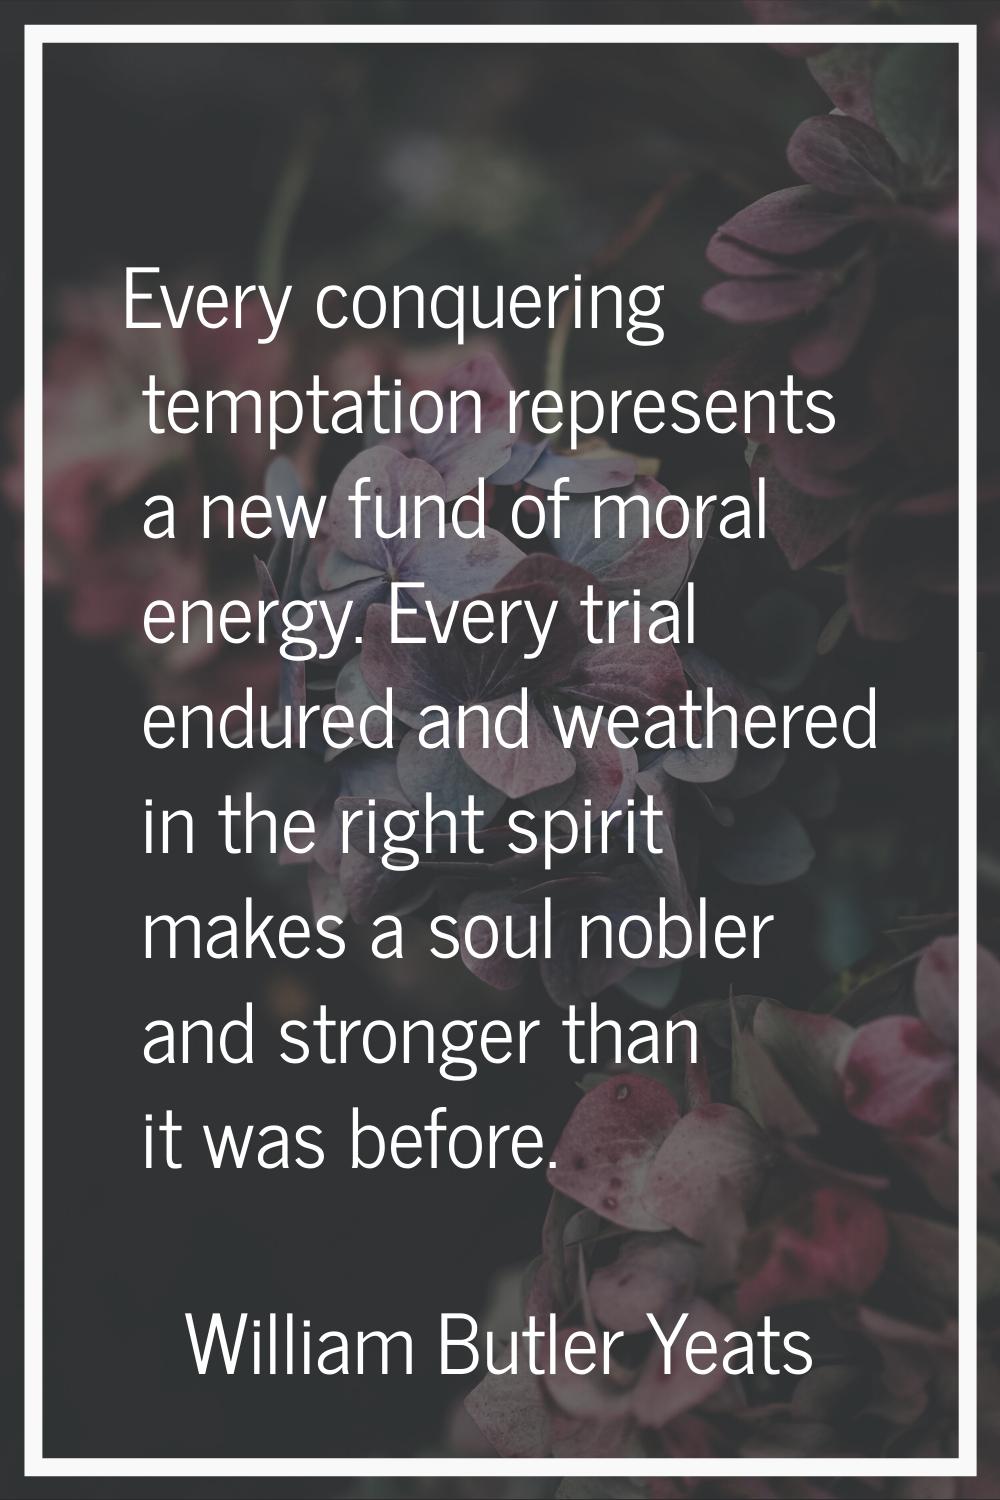 Every conquering temptation represents a new fund of moral energy. Every trial endured and weathere